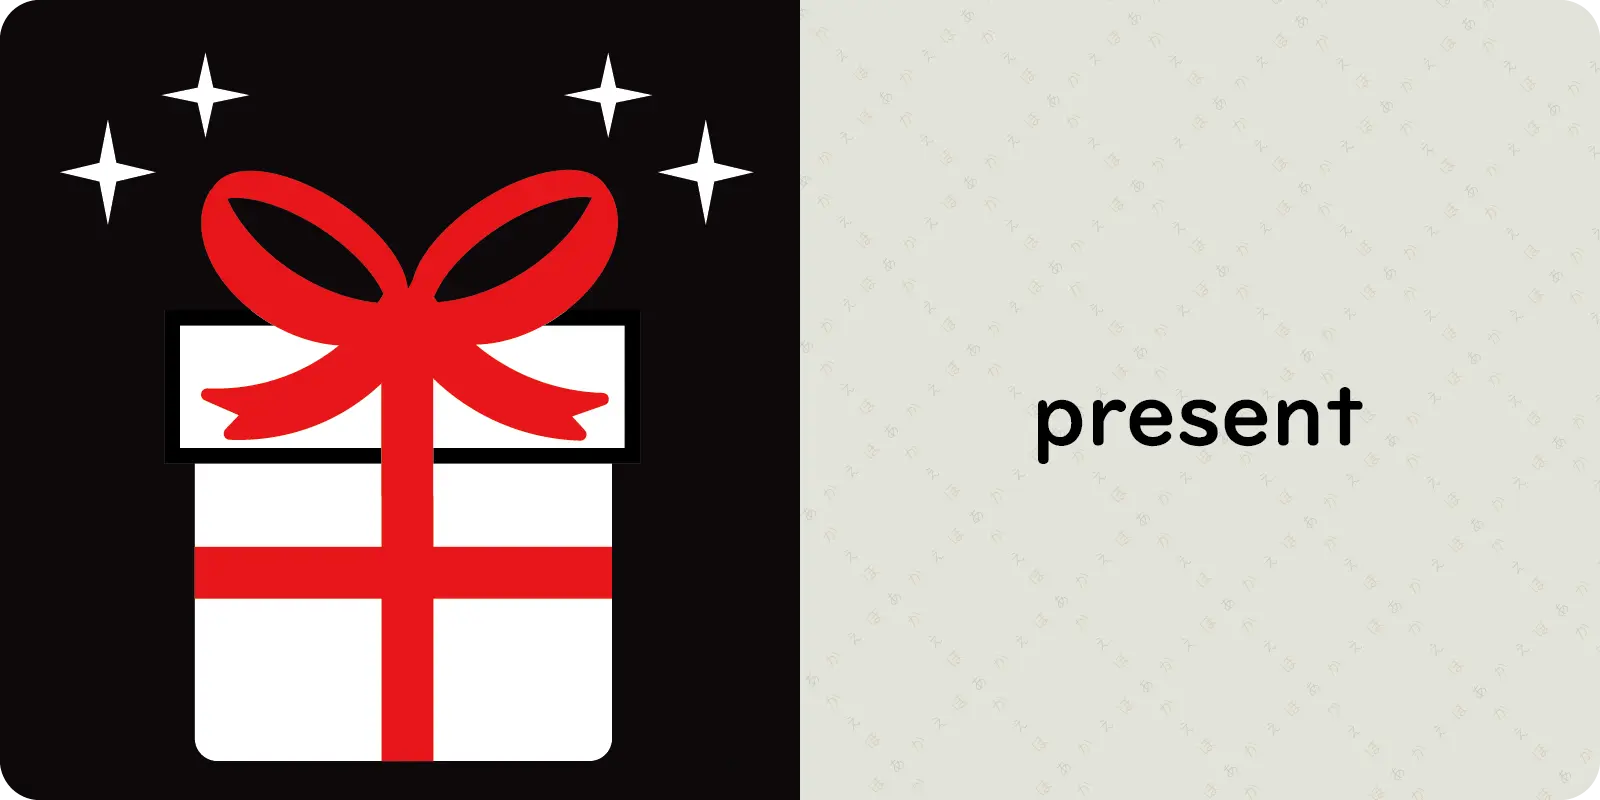 present<br>
<br>
（プレゼント）